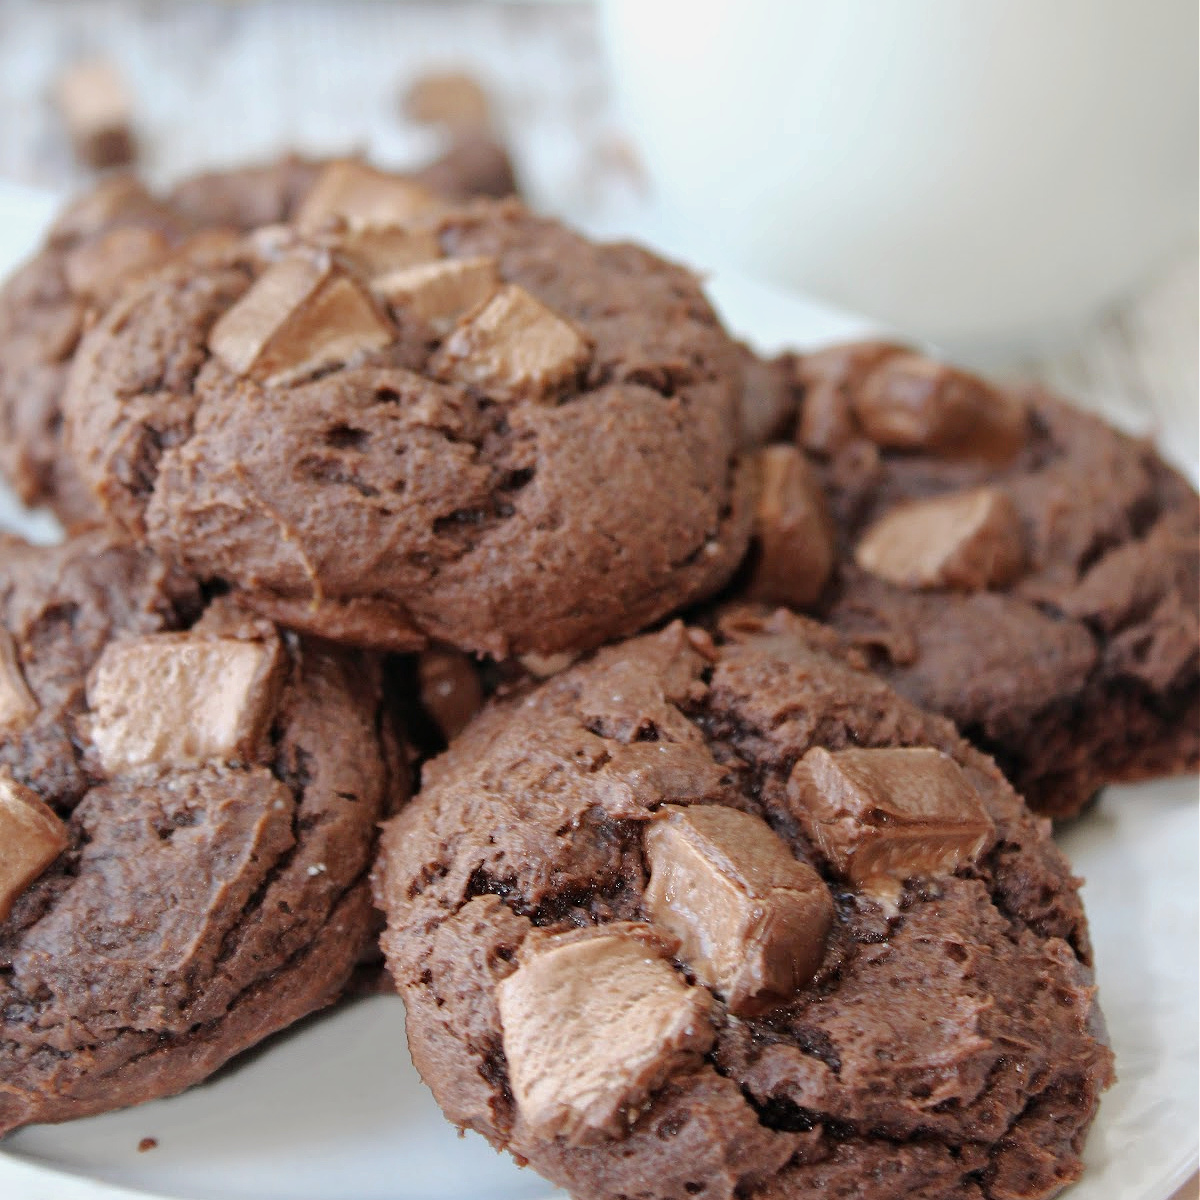 Gooey chocolate cookies on a white plate with milk behind them.